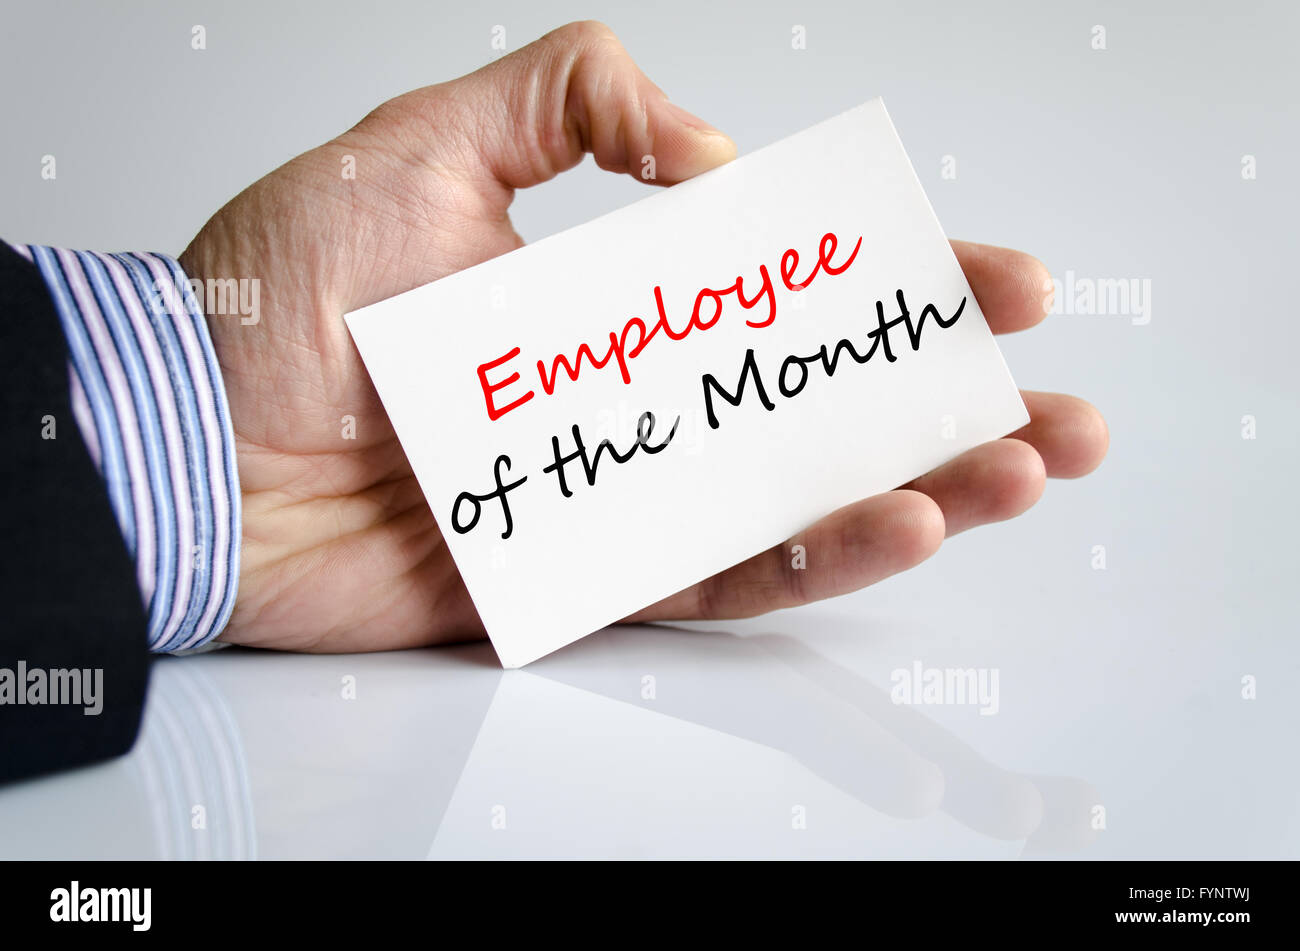 Employee of the month Text Concept Stock Photo